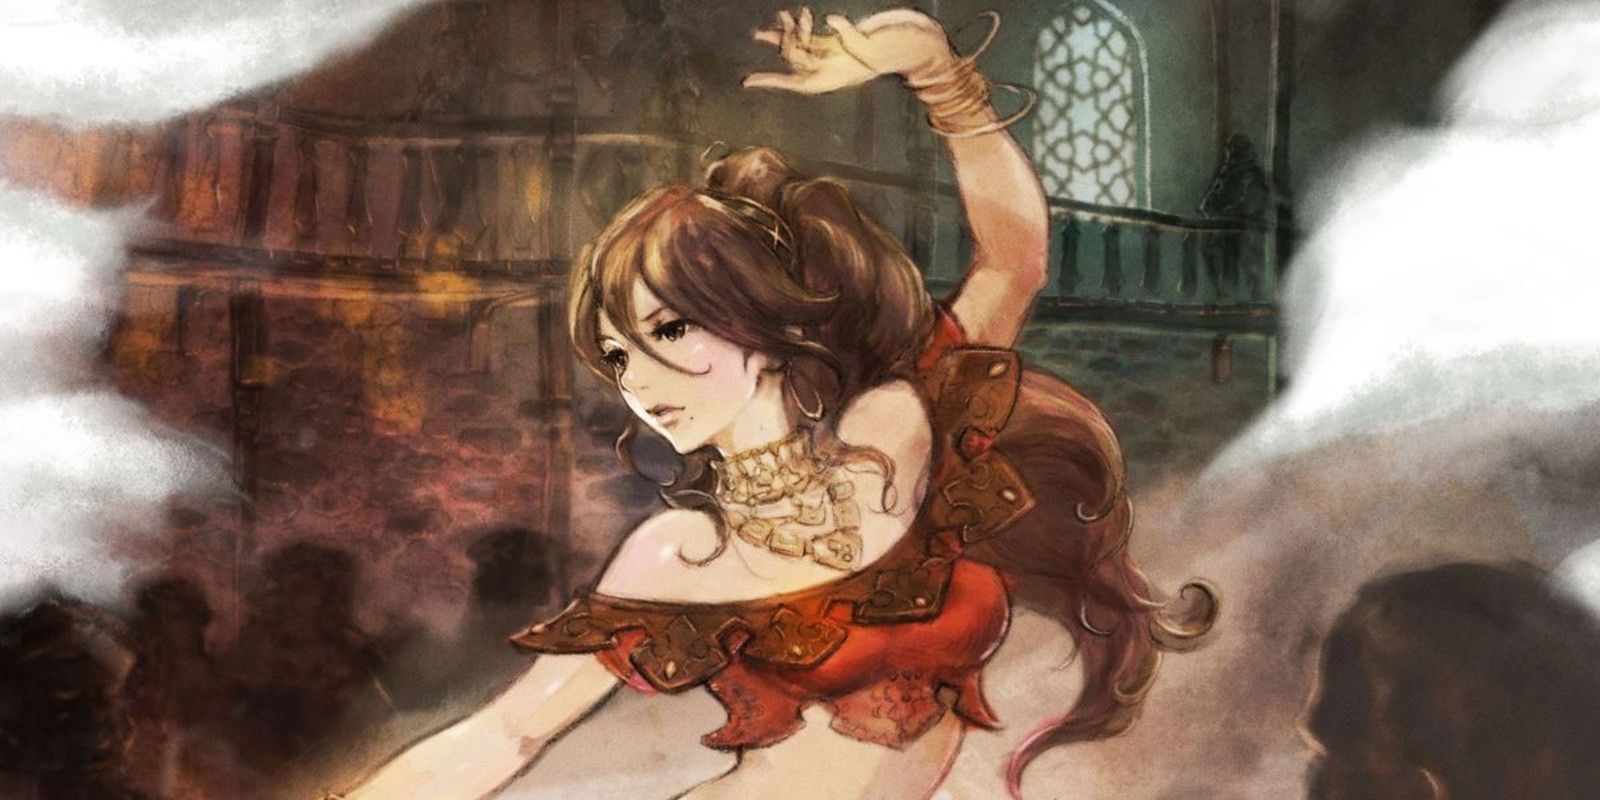 Most players choose Primrose as a Starseer because it works well with her Dancer job class in Octopath Traveler